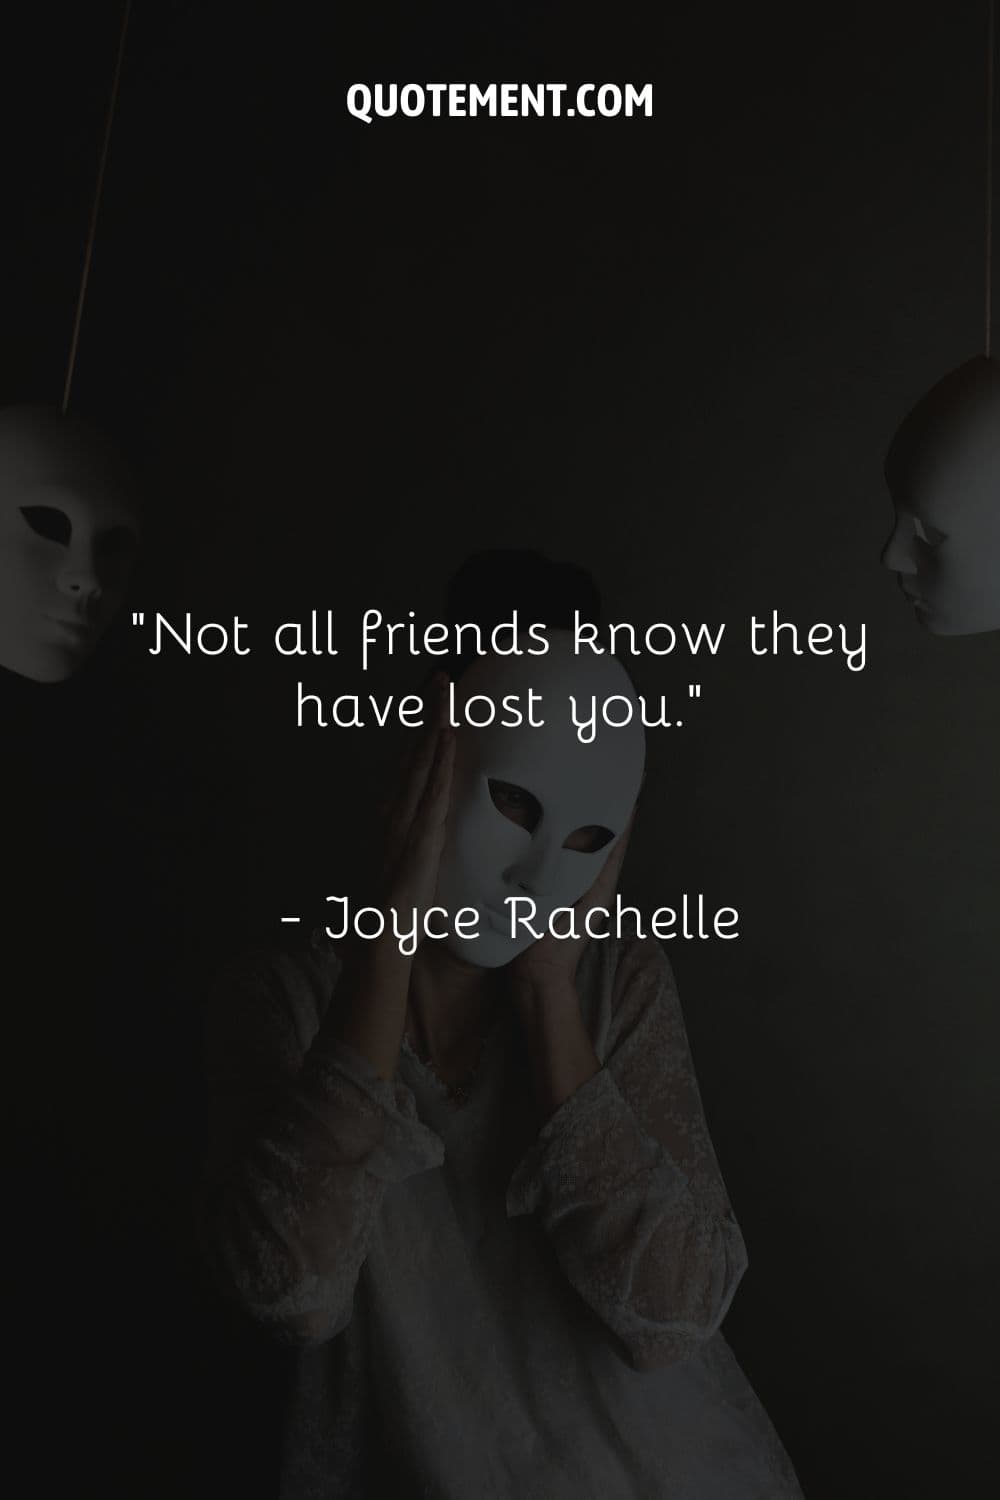 Not all friends know they have lost you.